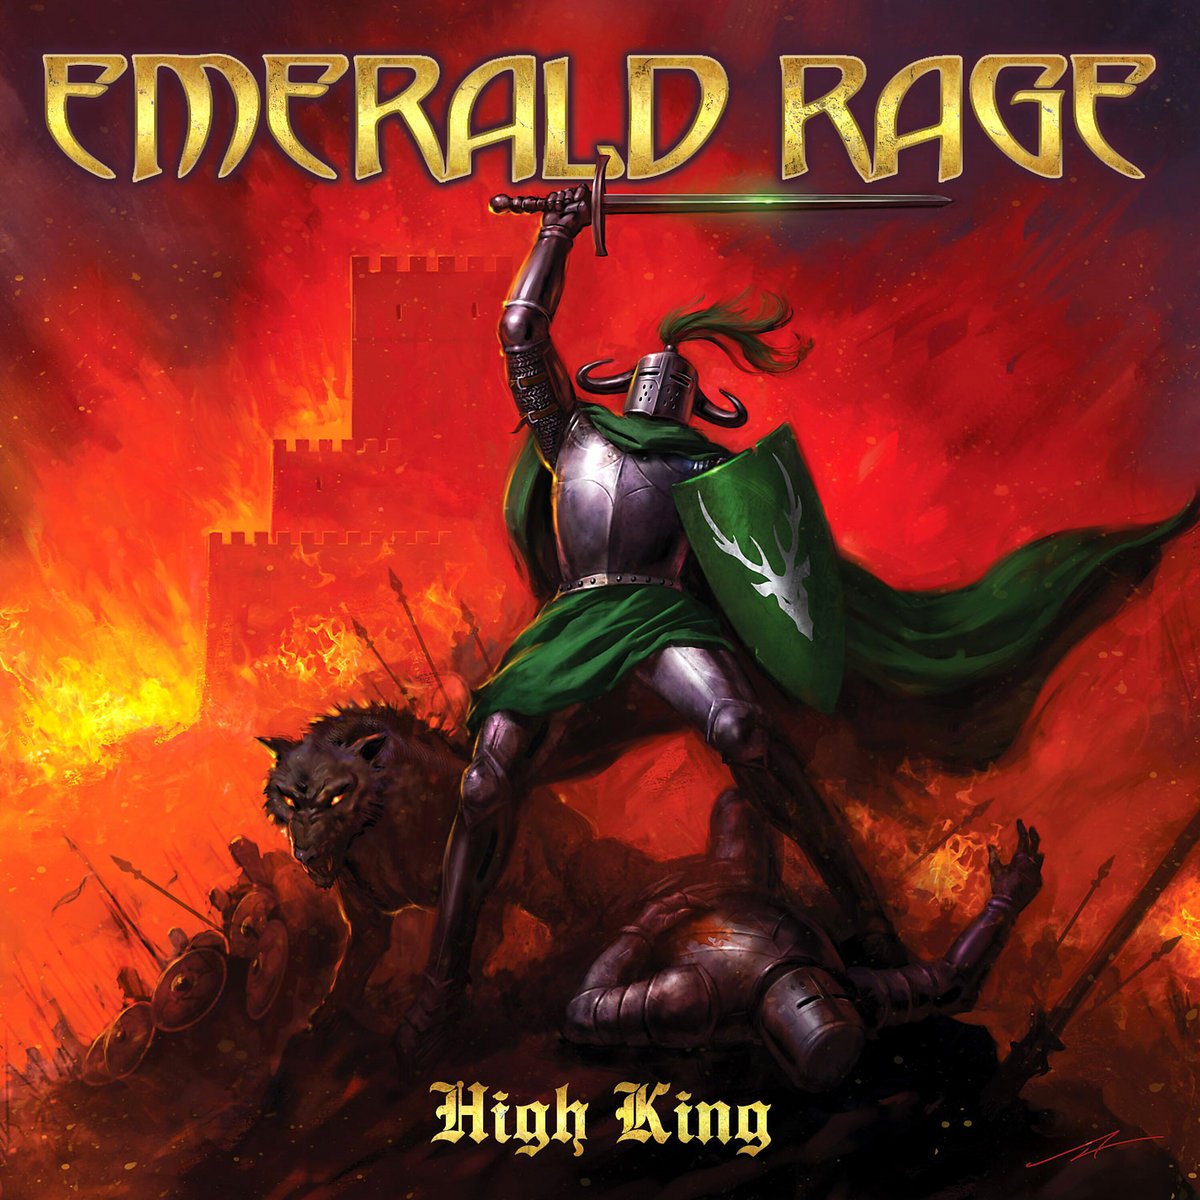 Interview with EMERALD RAGE